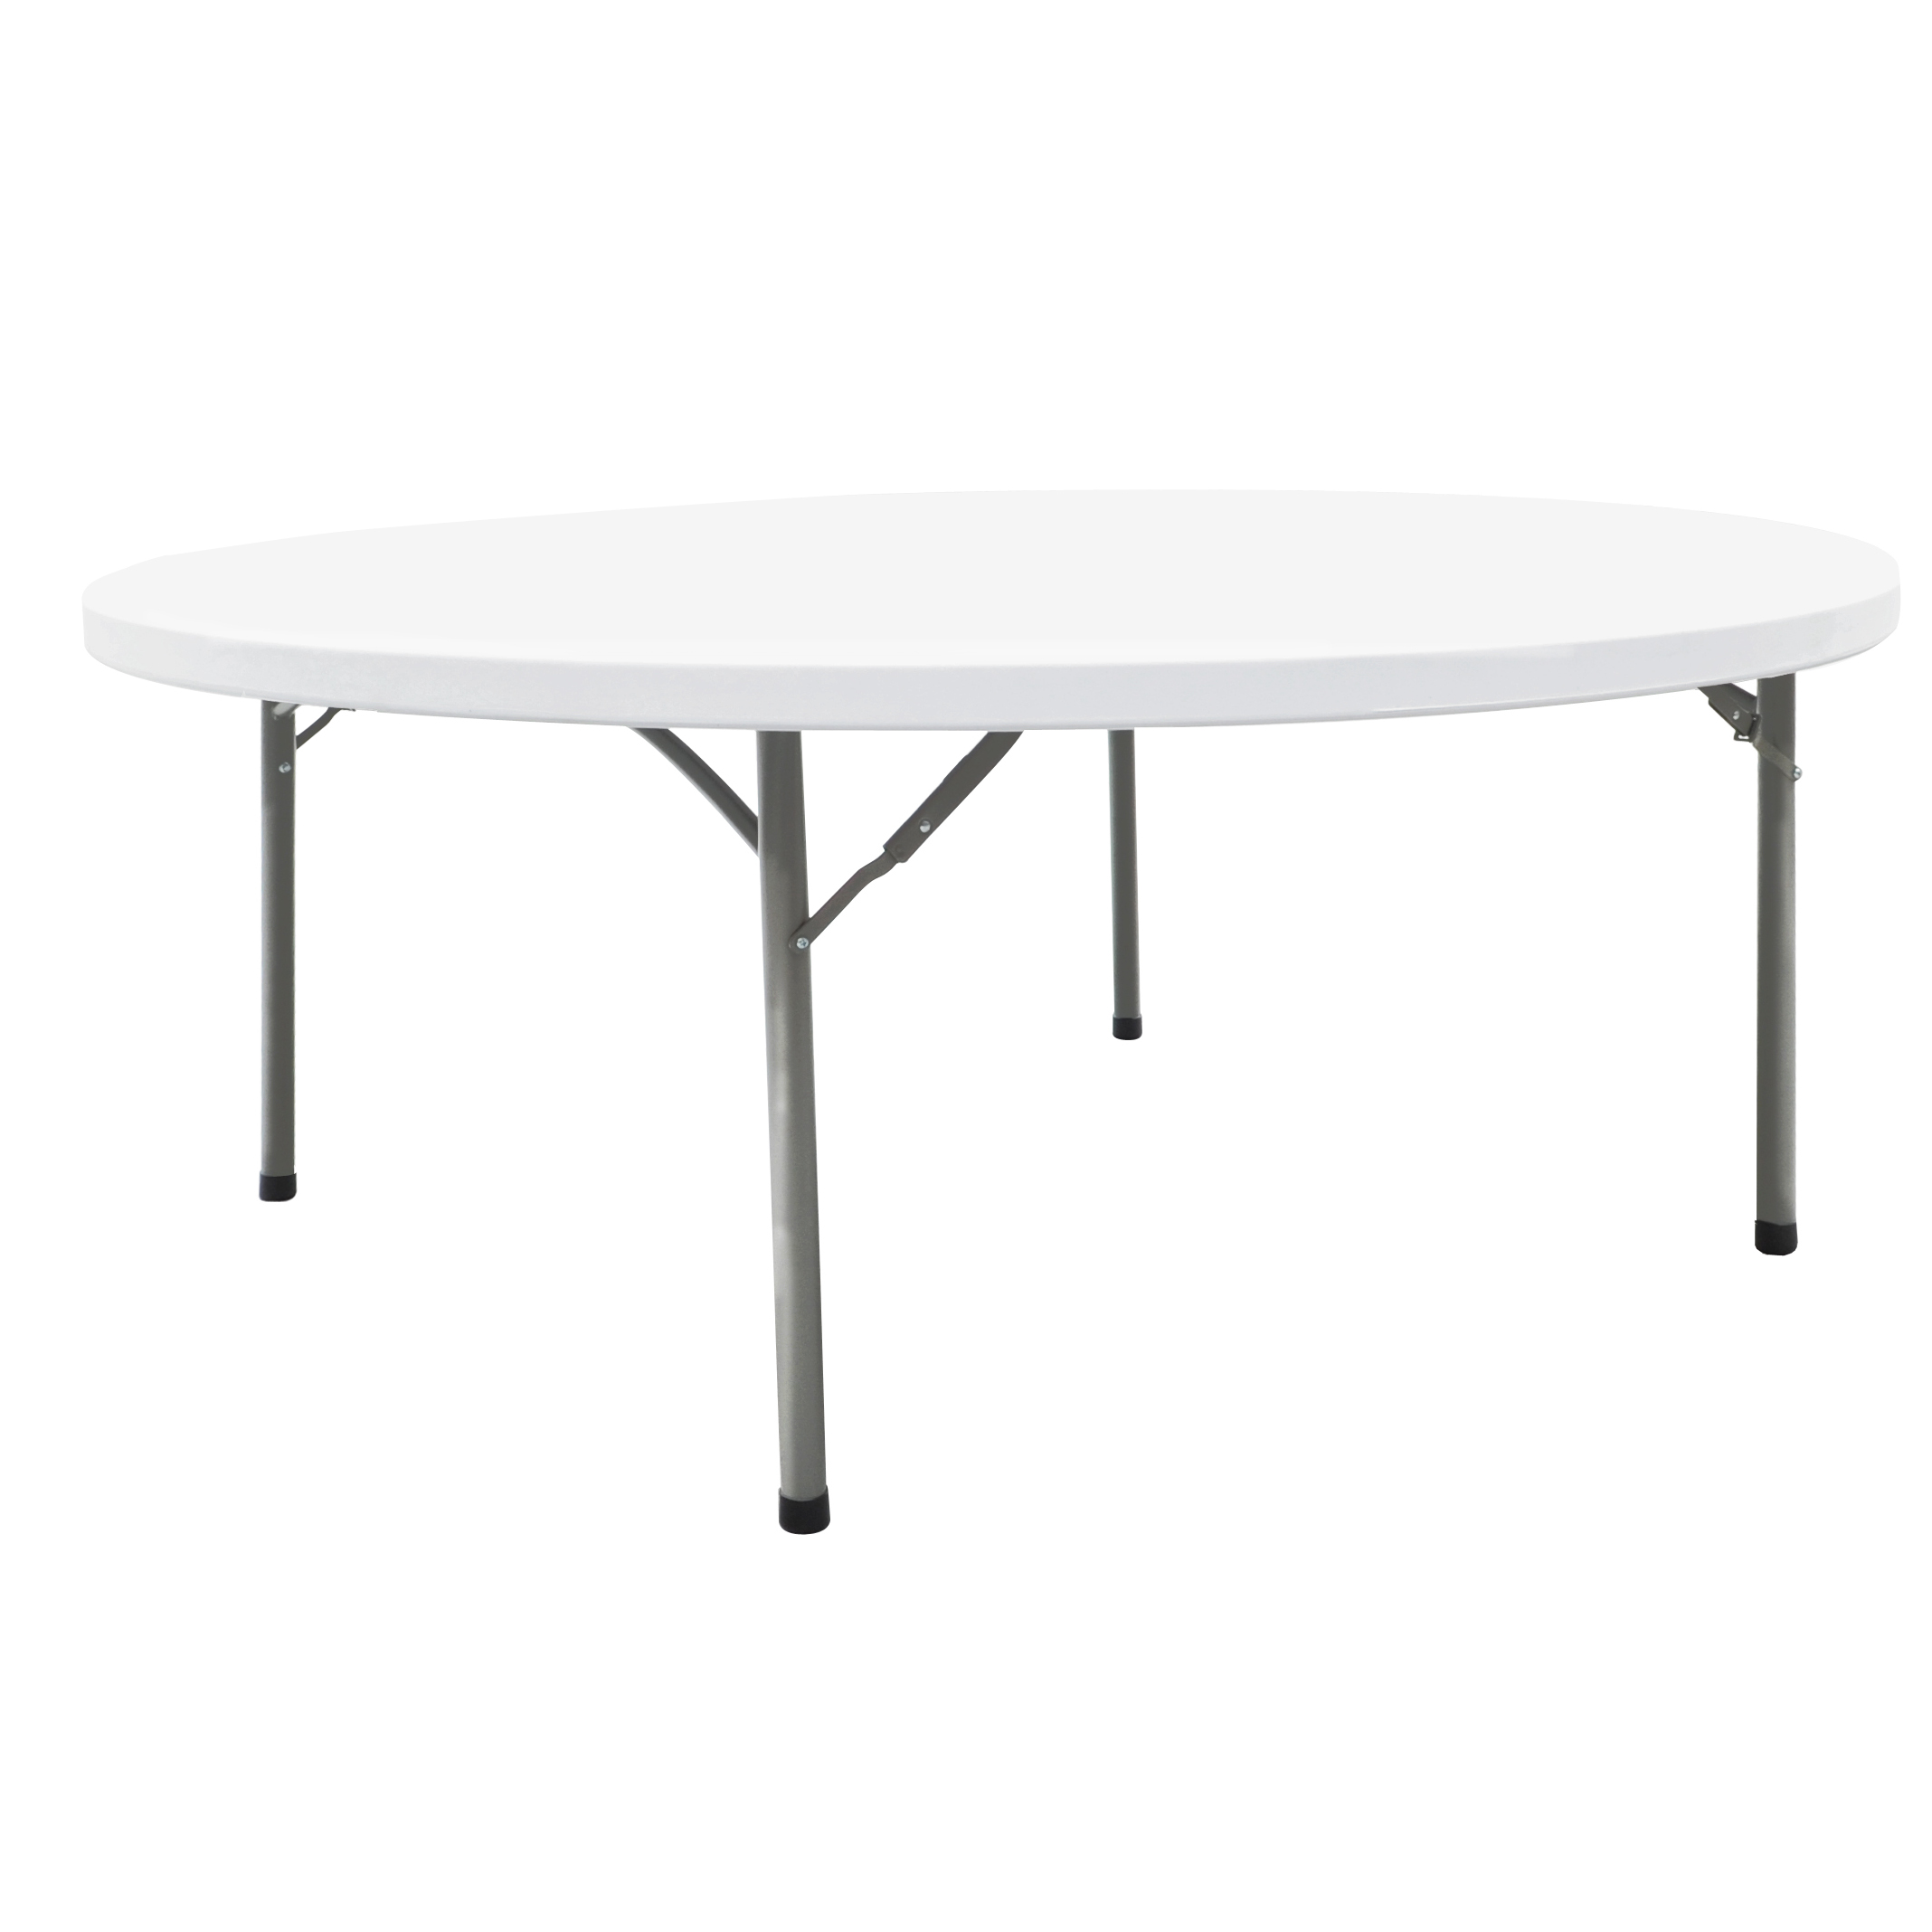 72-inch round table 